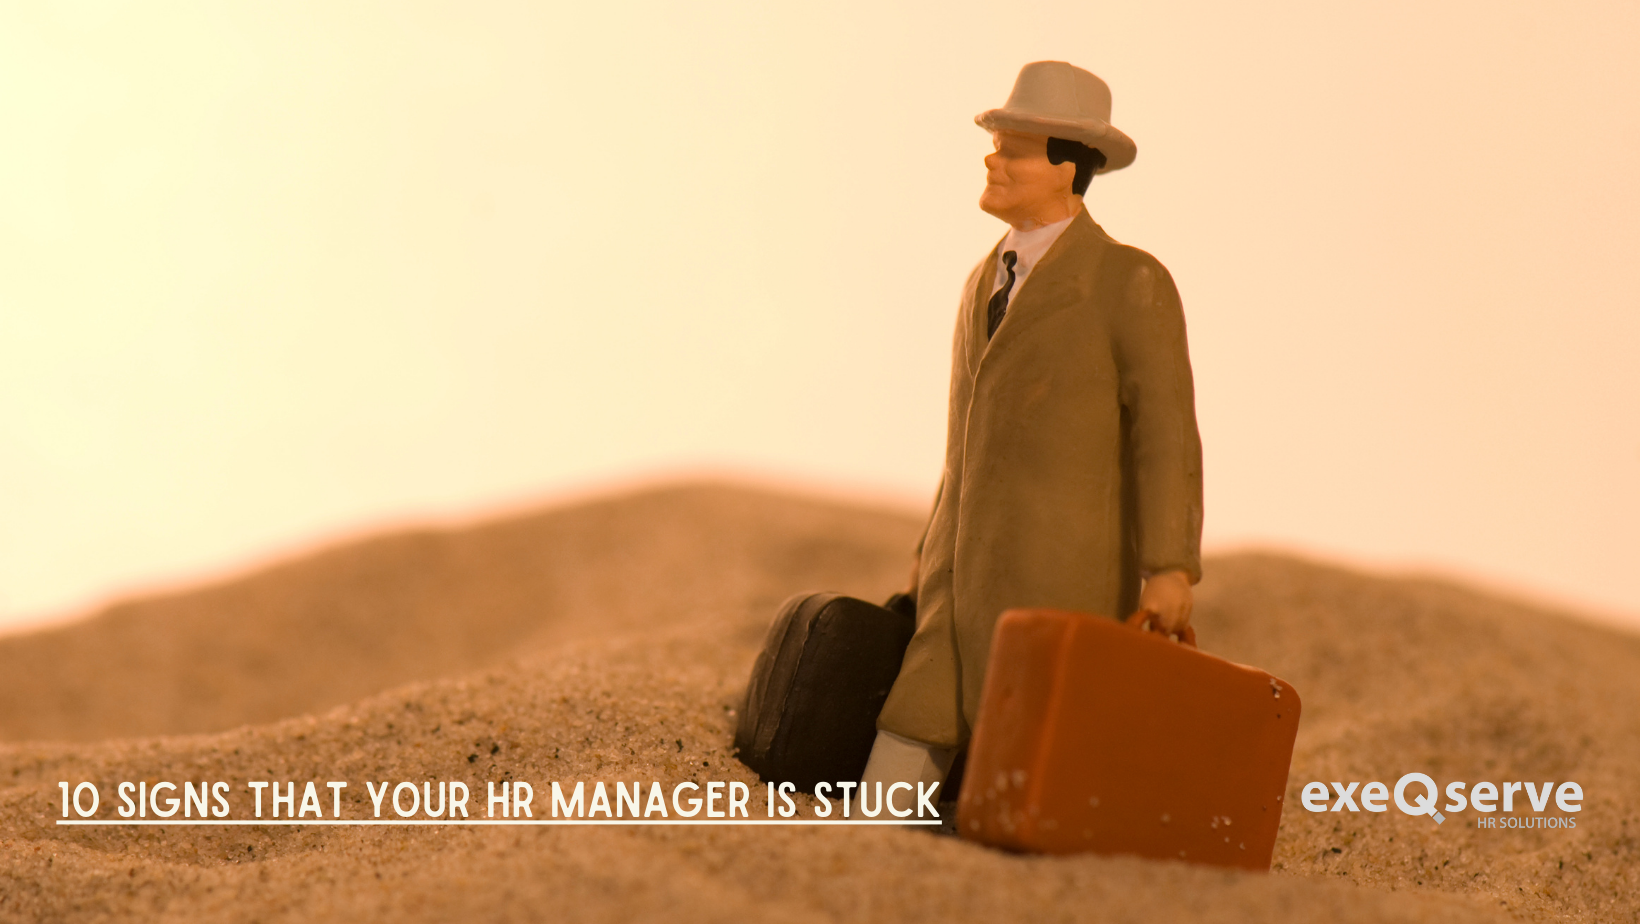 10 Signs that Your HR Manager is Stuck